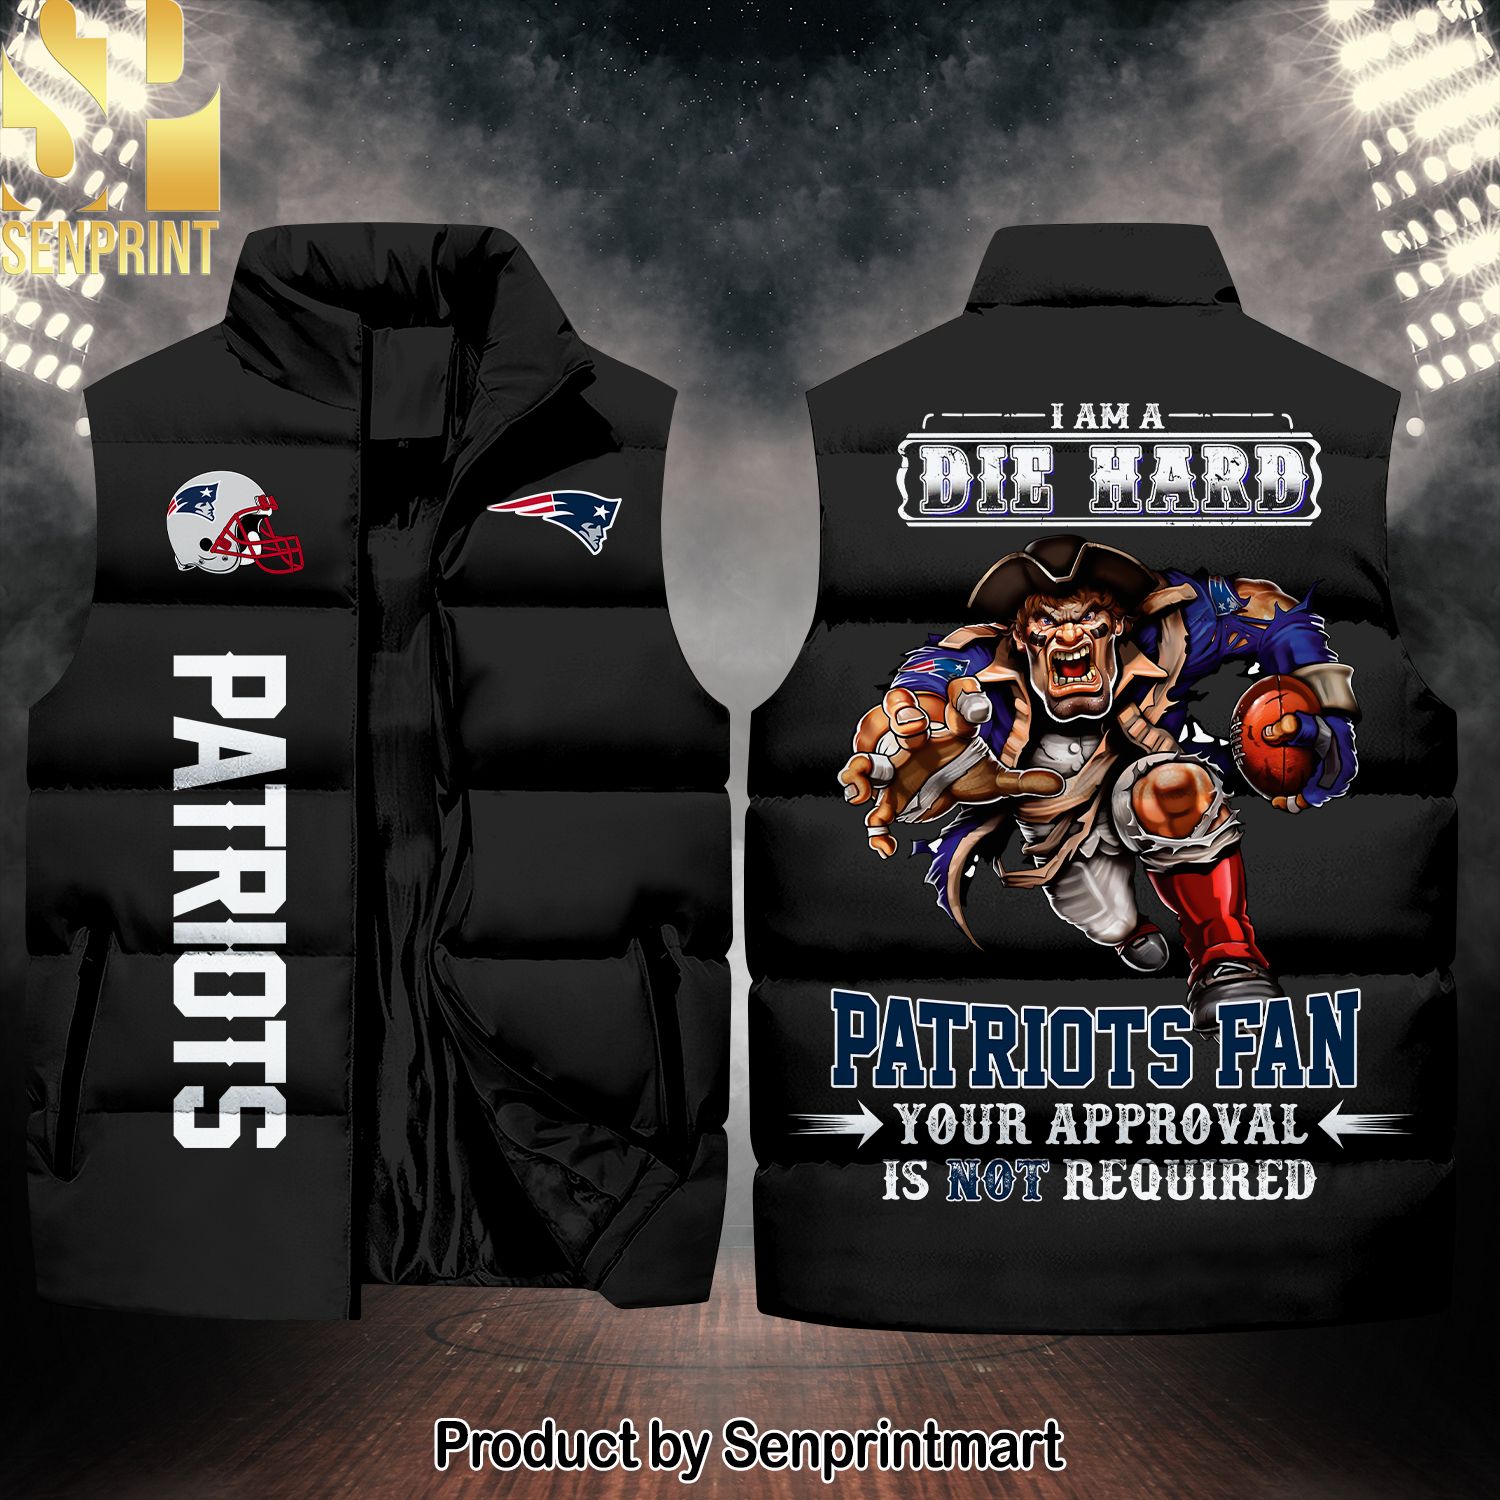 National Football League New England Patriots Die Hard Fan New Outfit Sleeveless Jacket